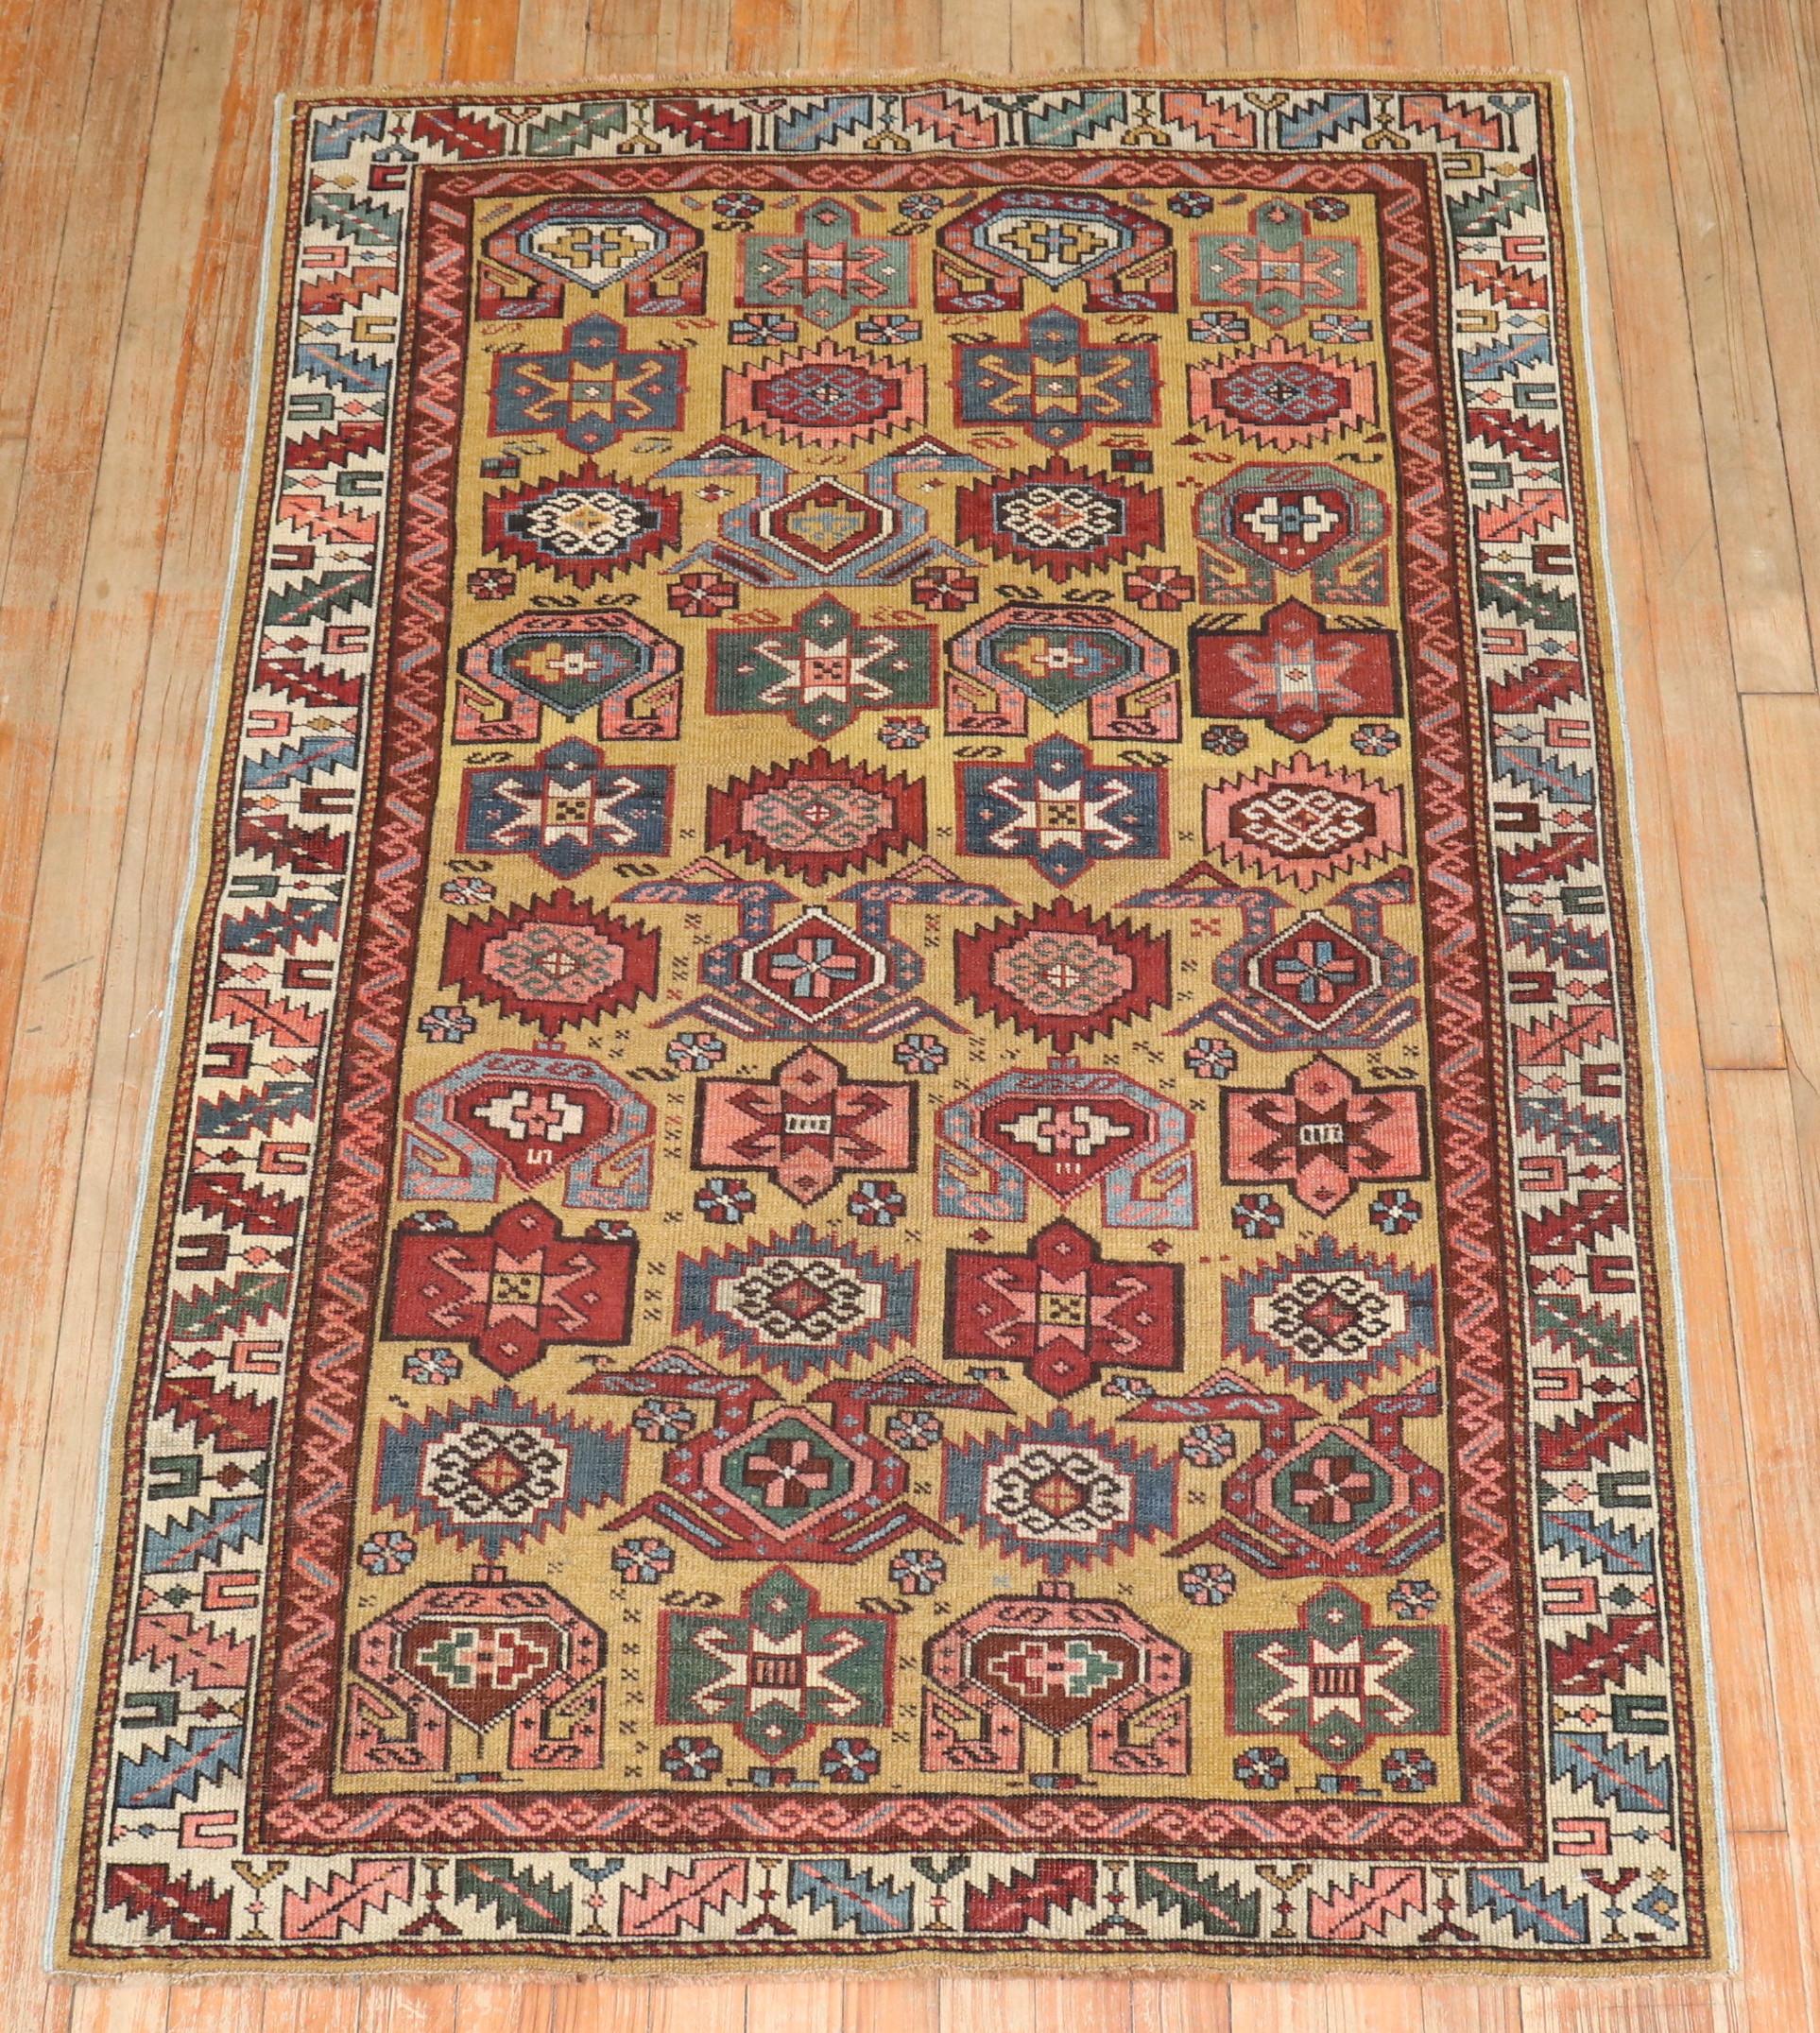 An authentic late 19th-century Caucasian Kuba rug featuring a mustard-colored ground.

3'5'' x 5'1''